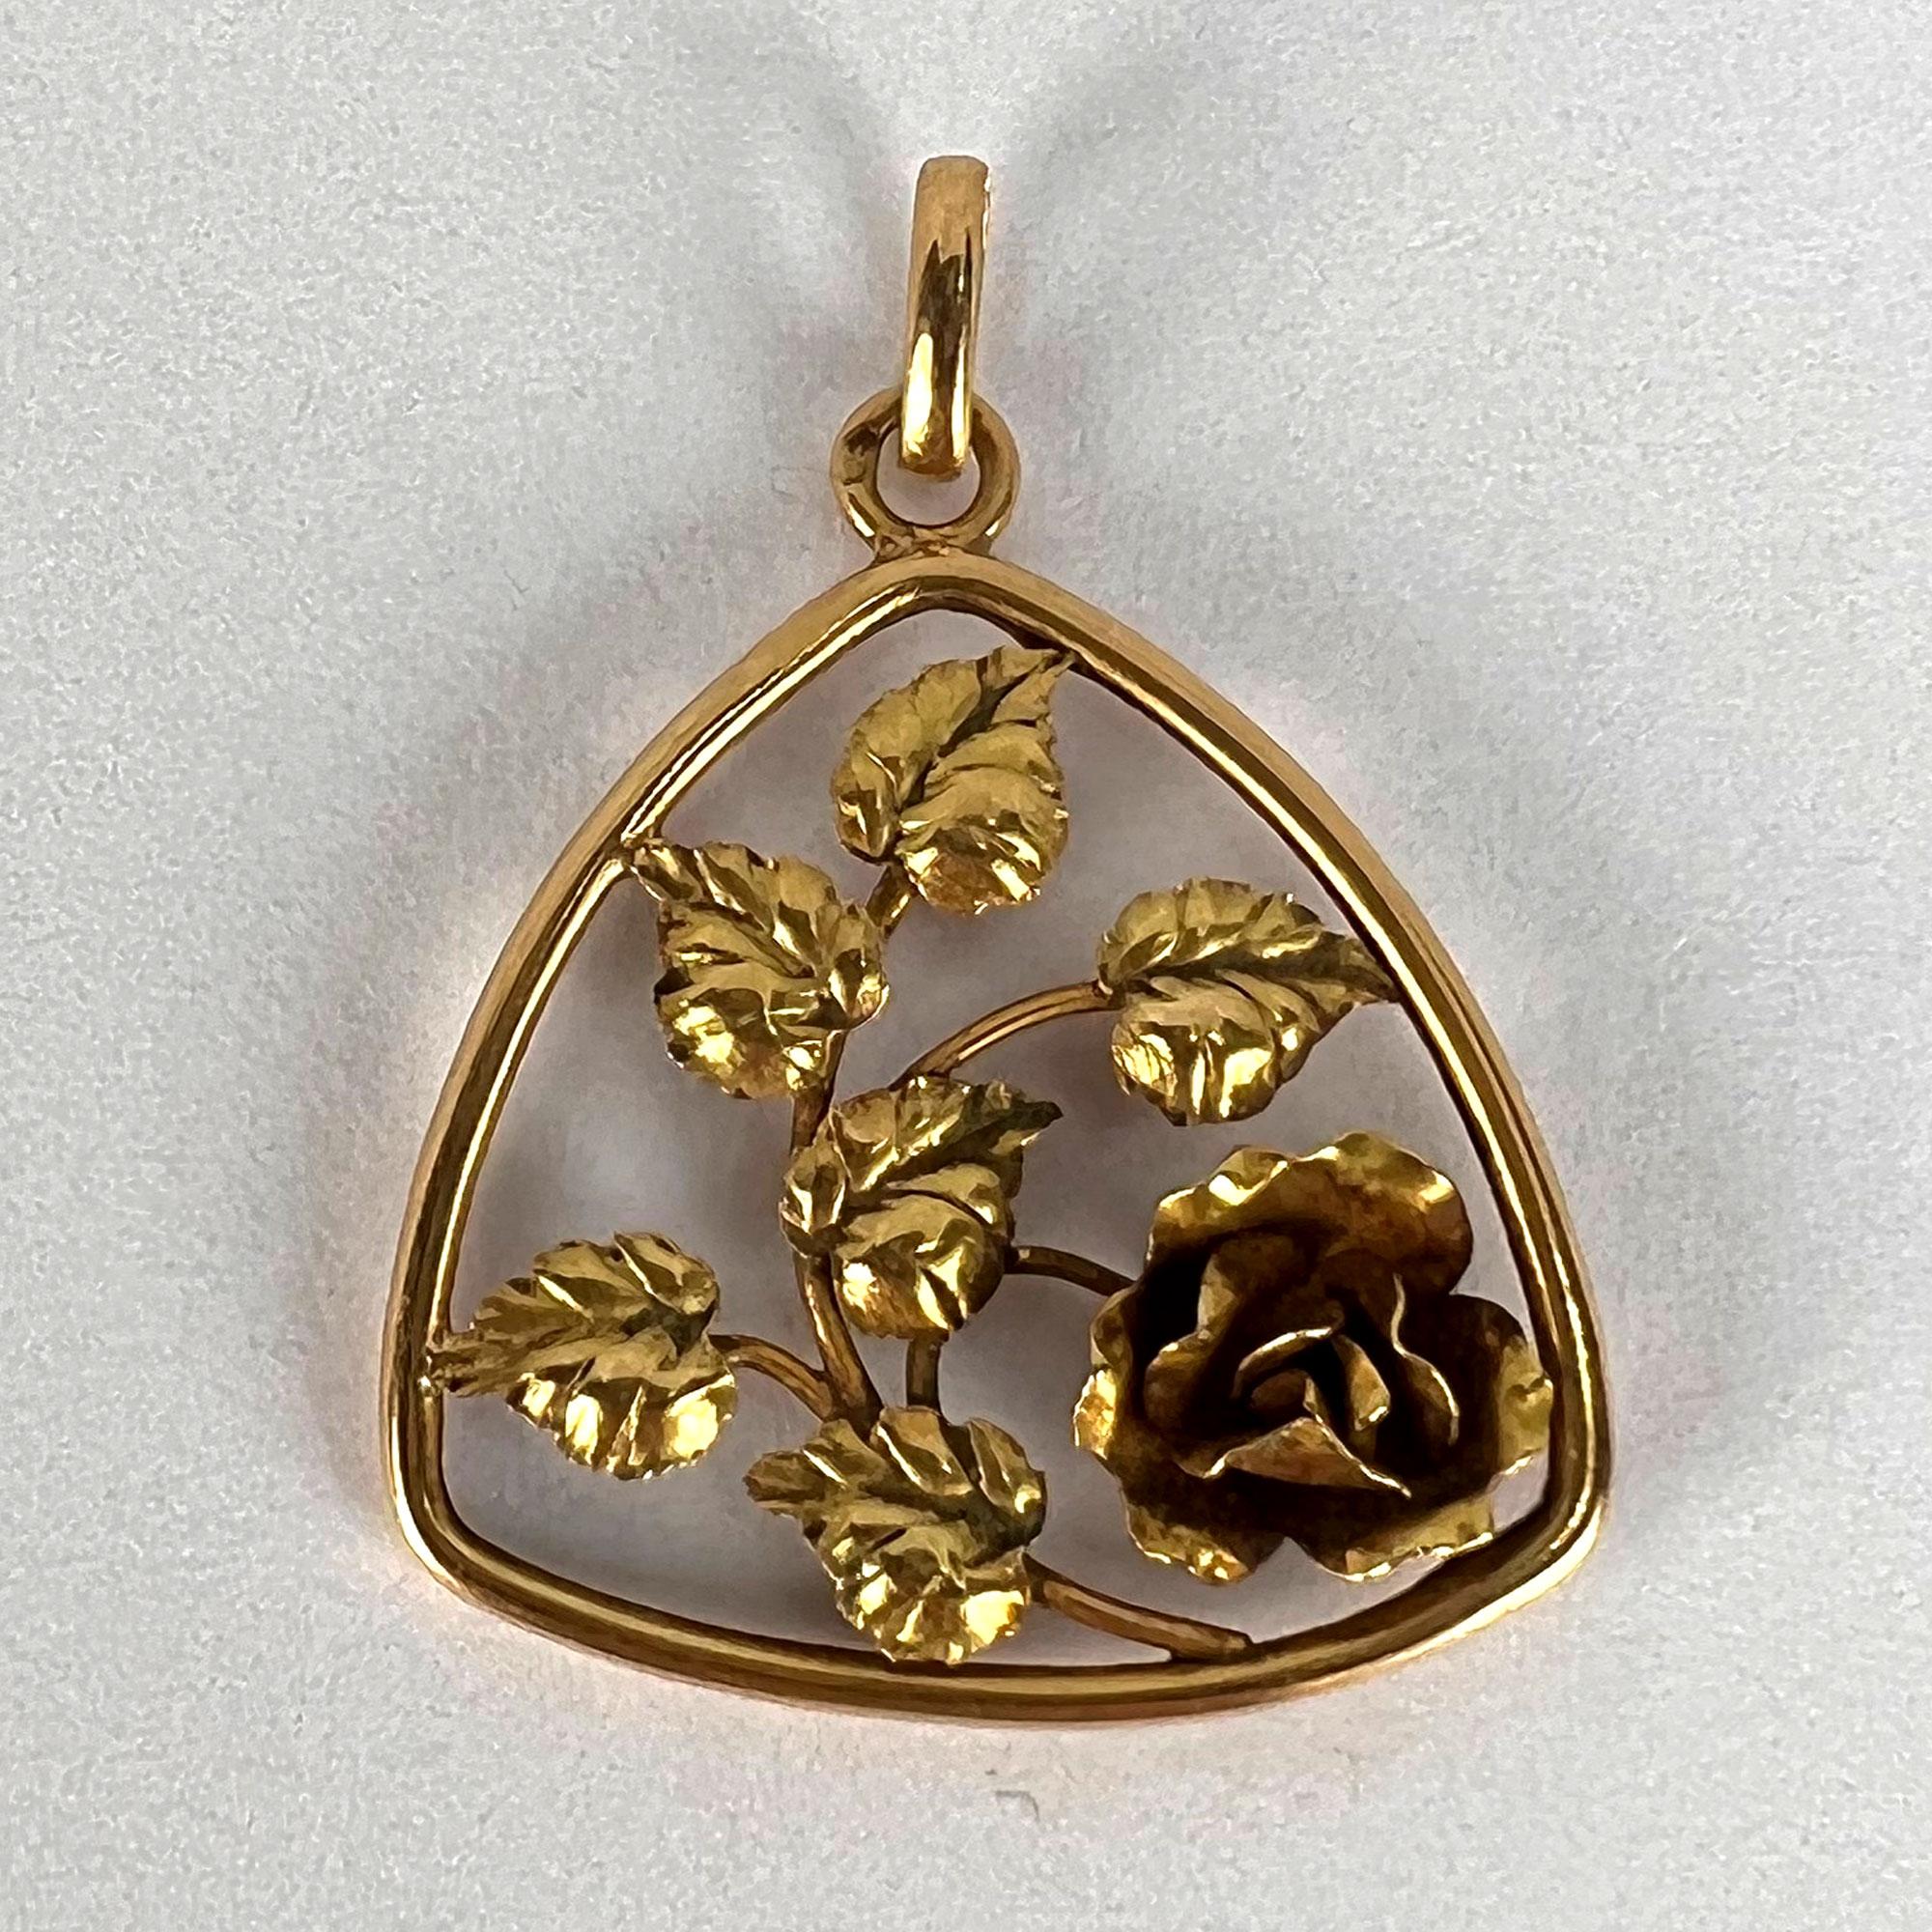 French Rose 18K Yellow Gold Charm Pendant 3